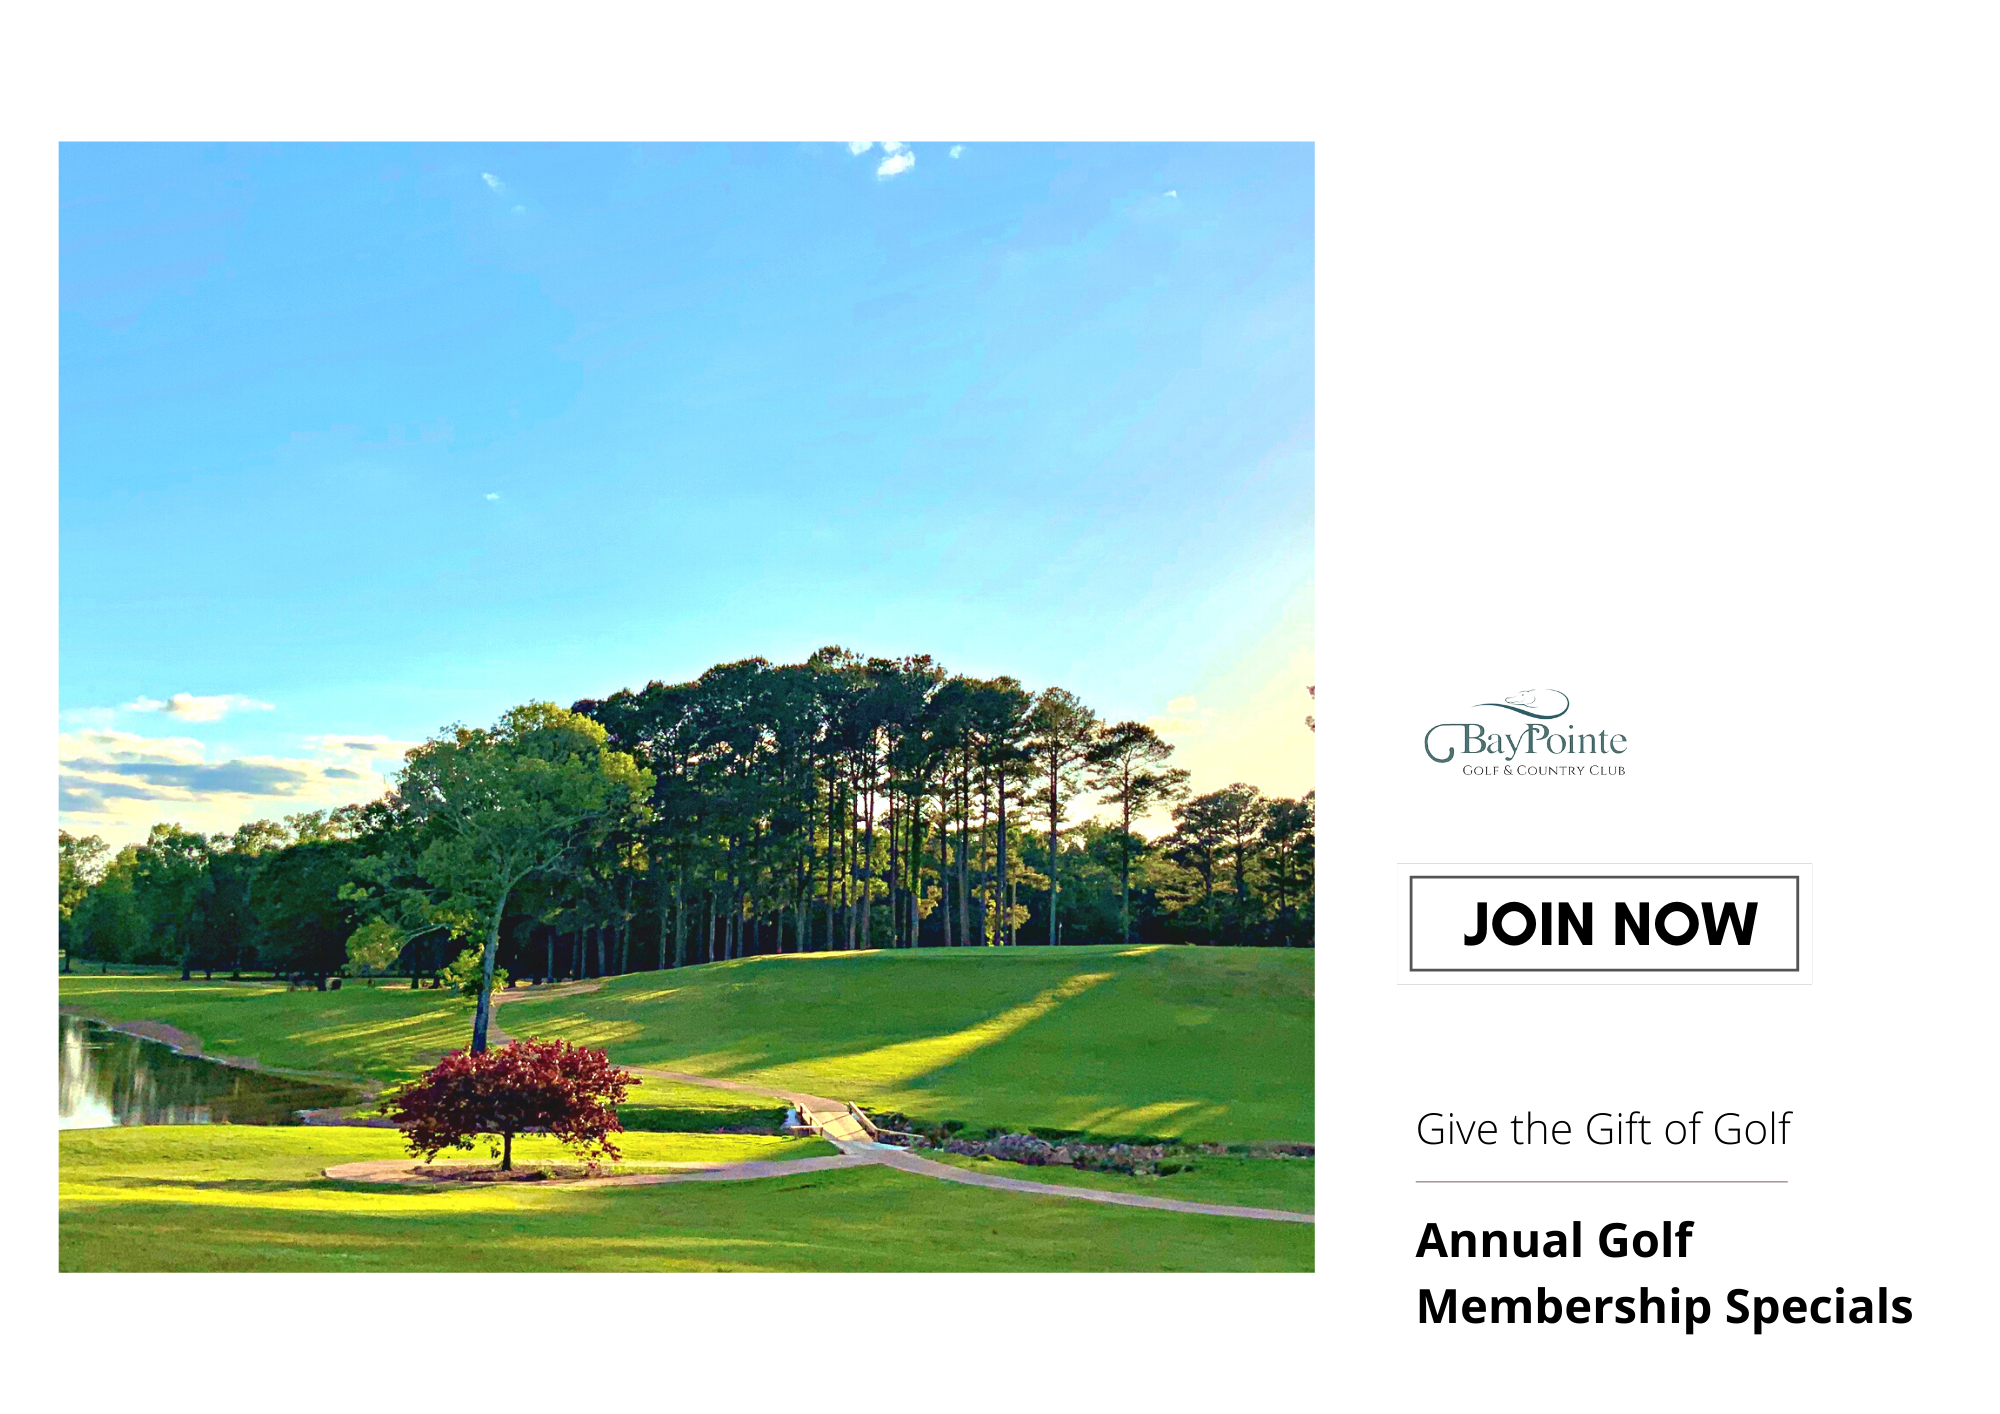 Annual Membership Special: Join Now and Receive 2 Months Free!